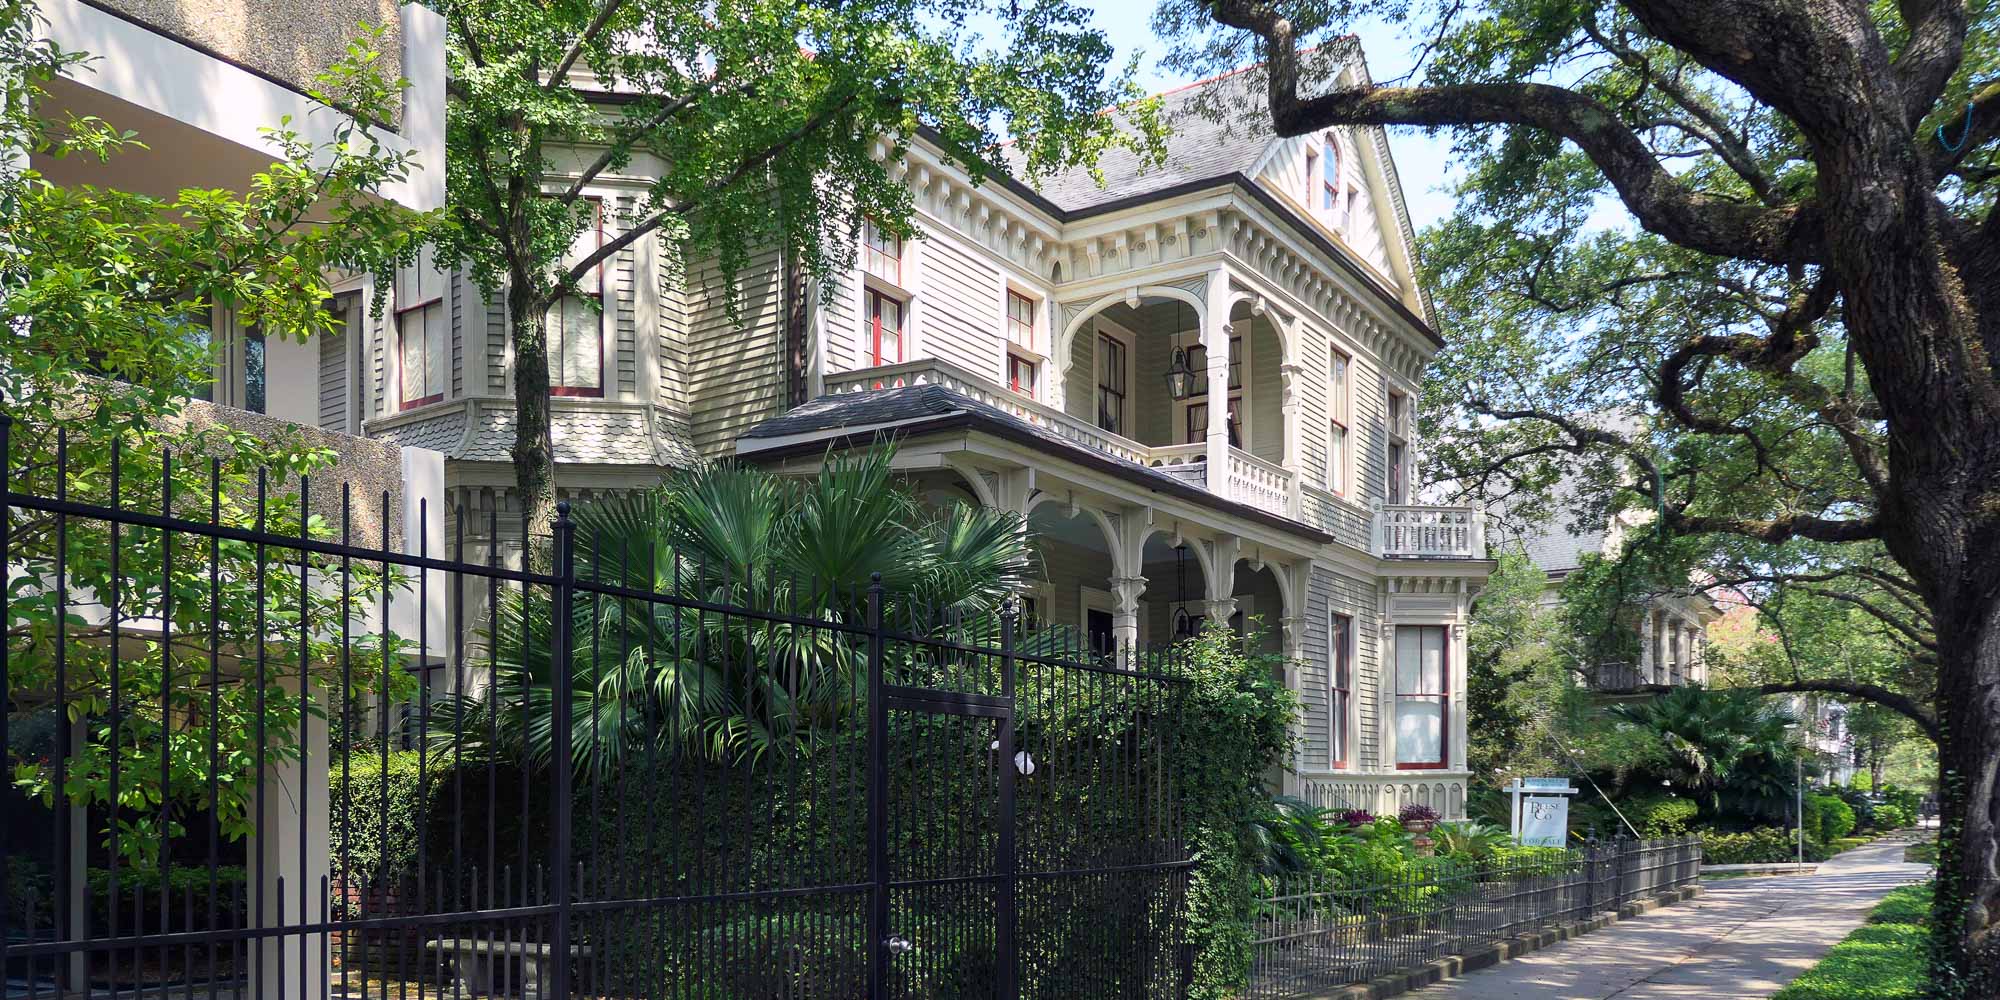 Beautiful home in the Garden District in New Orleans